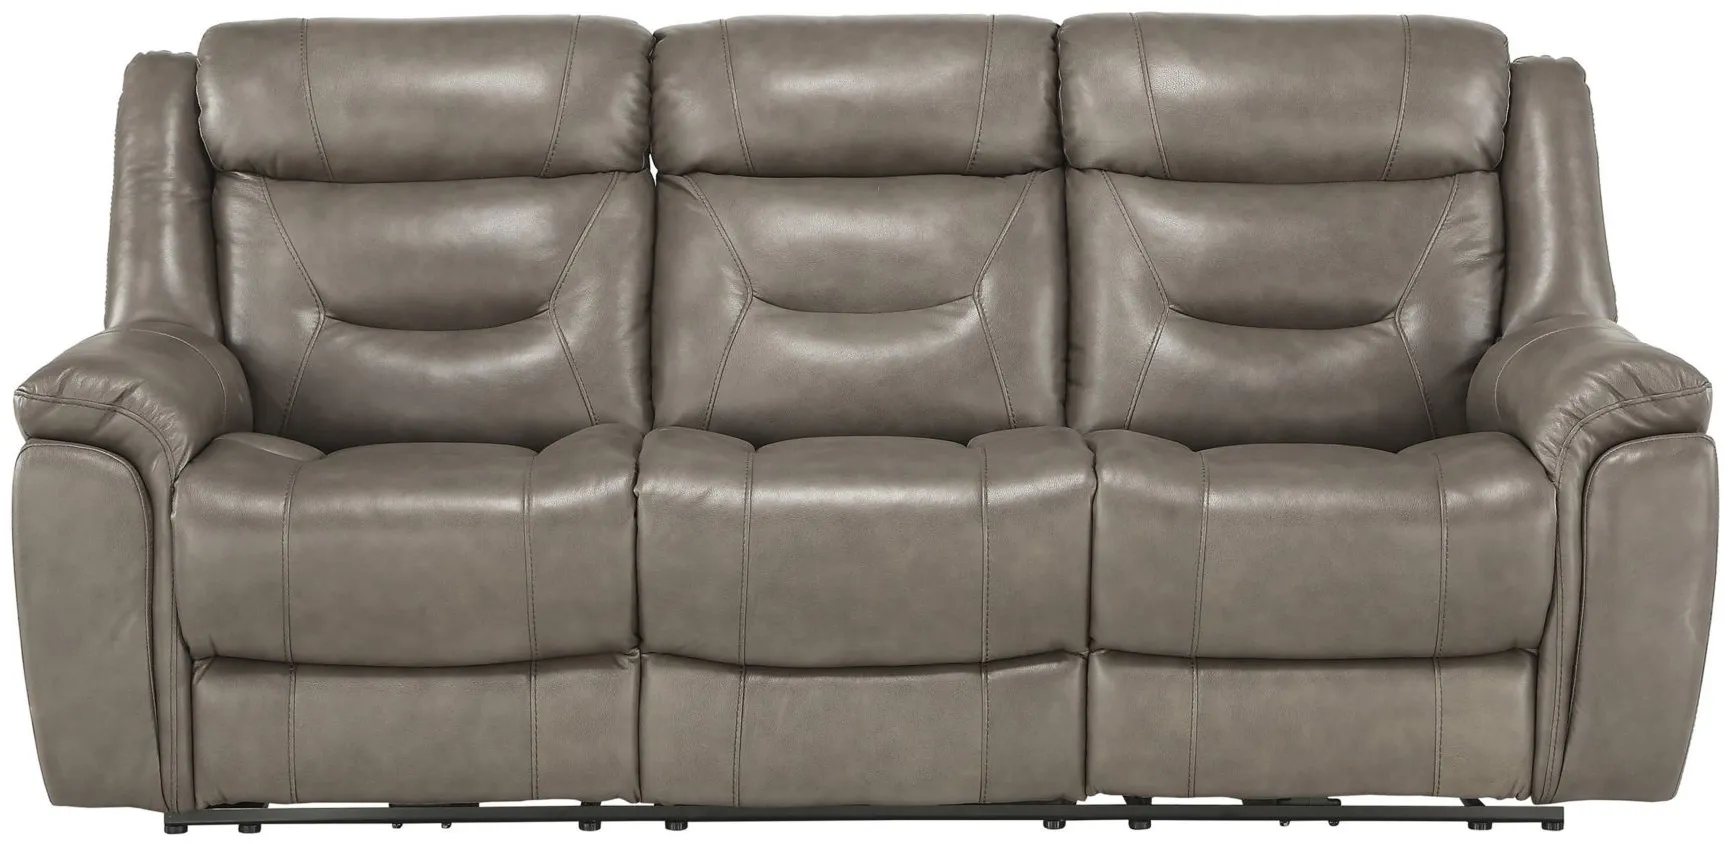 Northside Leather Power Reclining Sofa in Brownish Gray by Homelegance